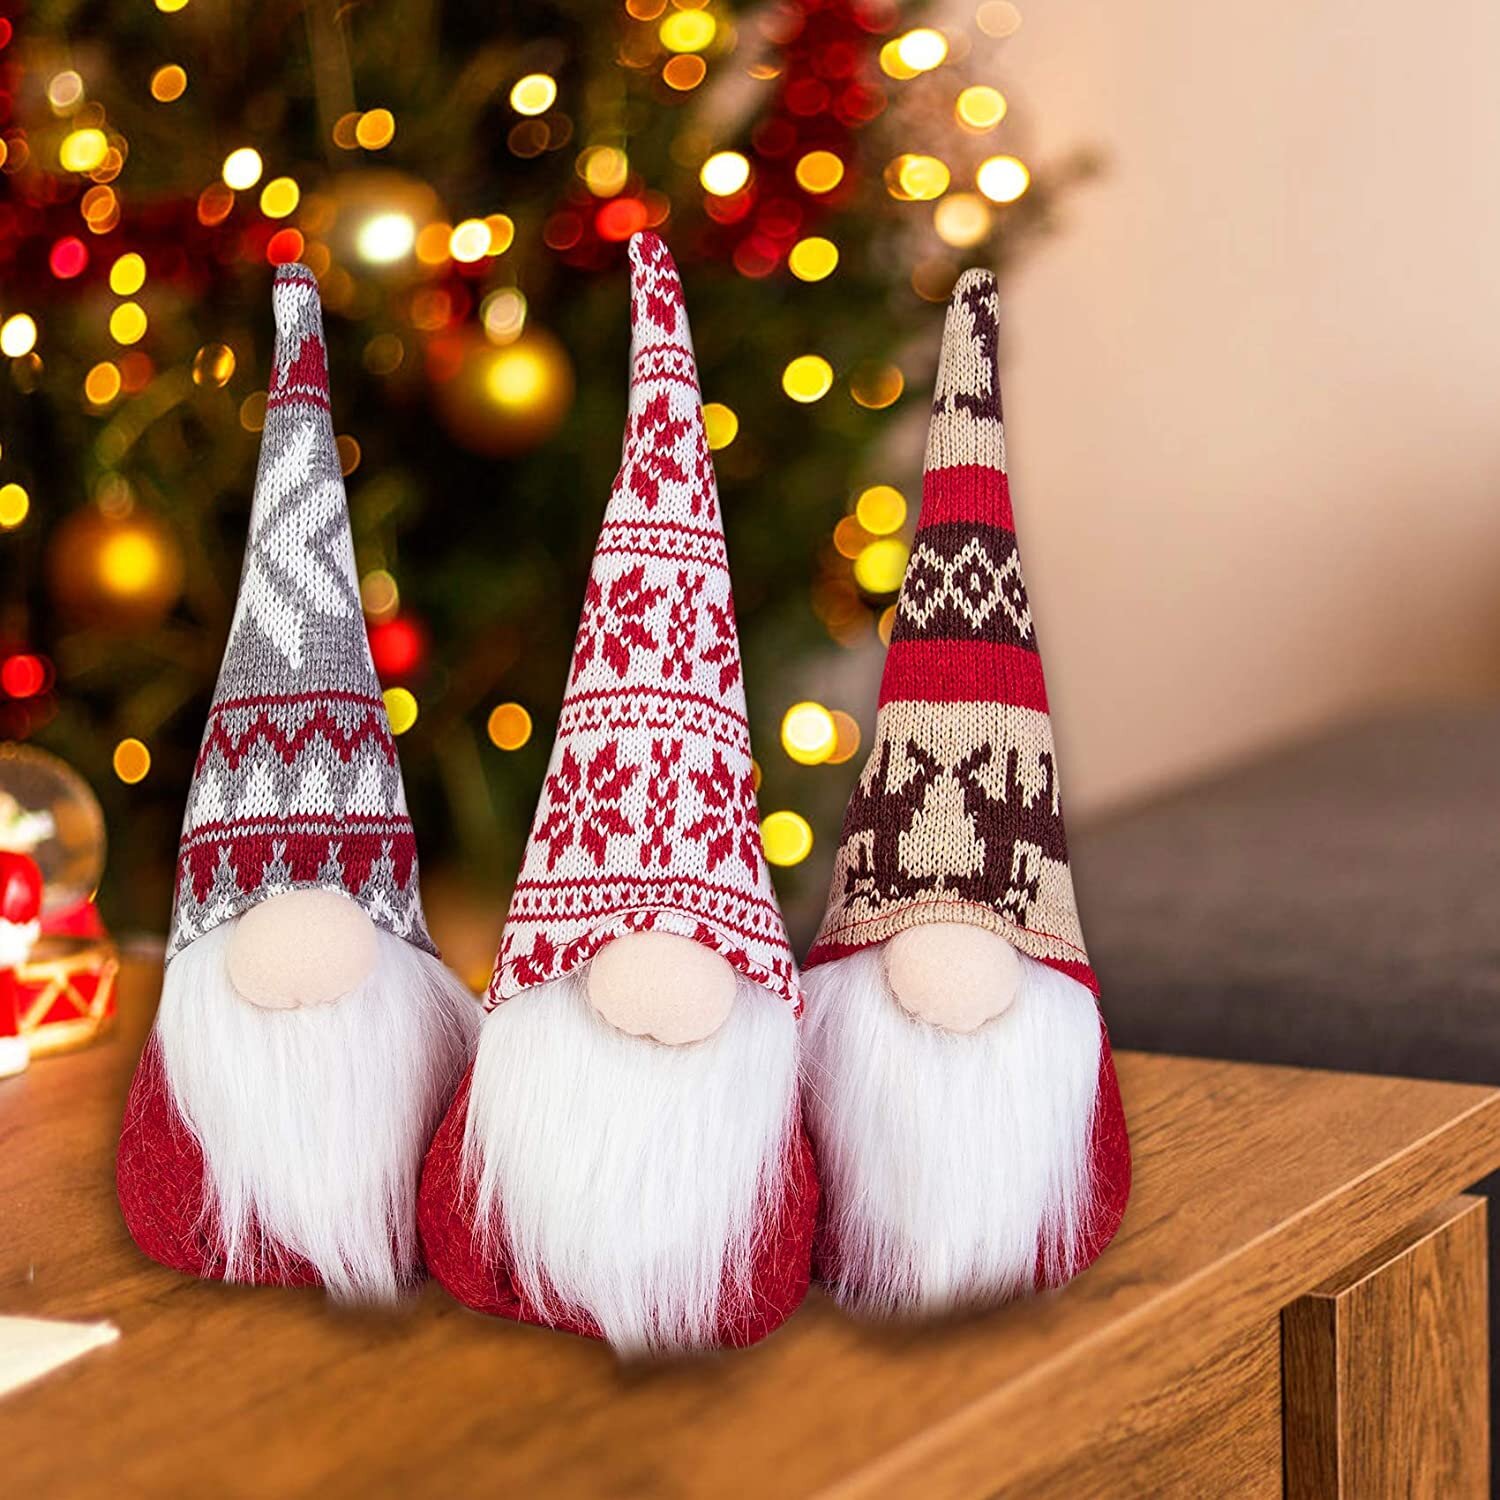 Red Wine Bottle Cover Bags Christmas Sequin Swedish Gnome Santa Xmas Decoration 